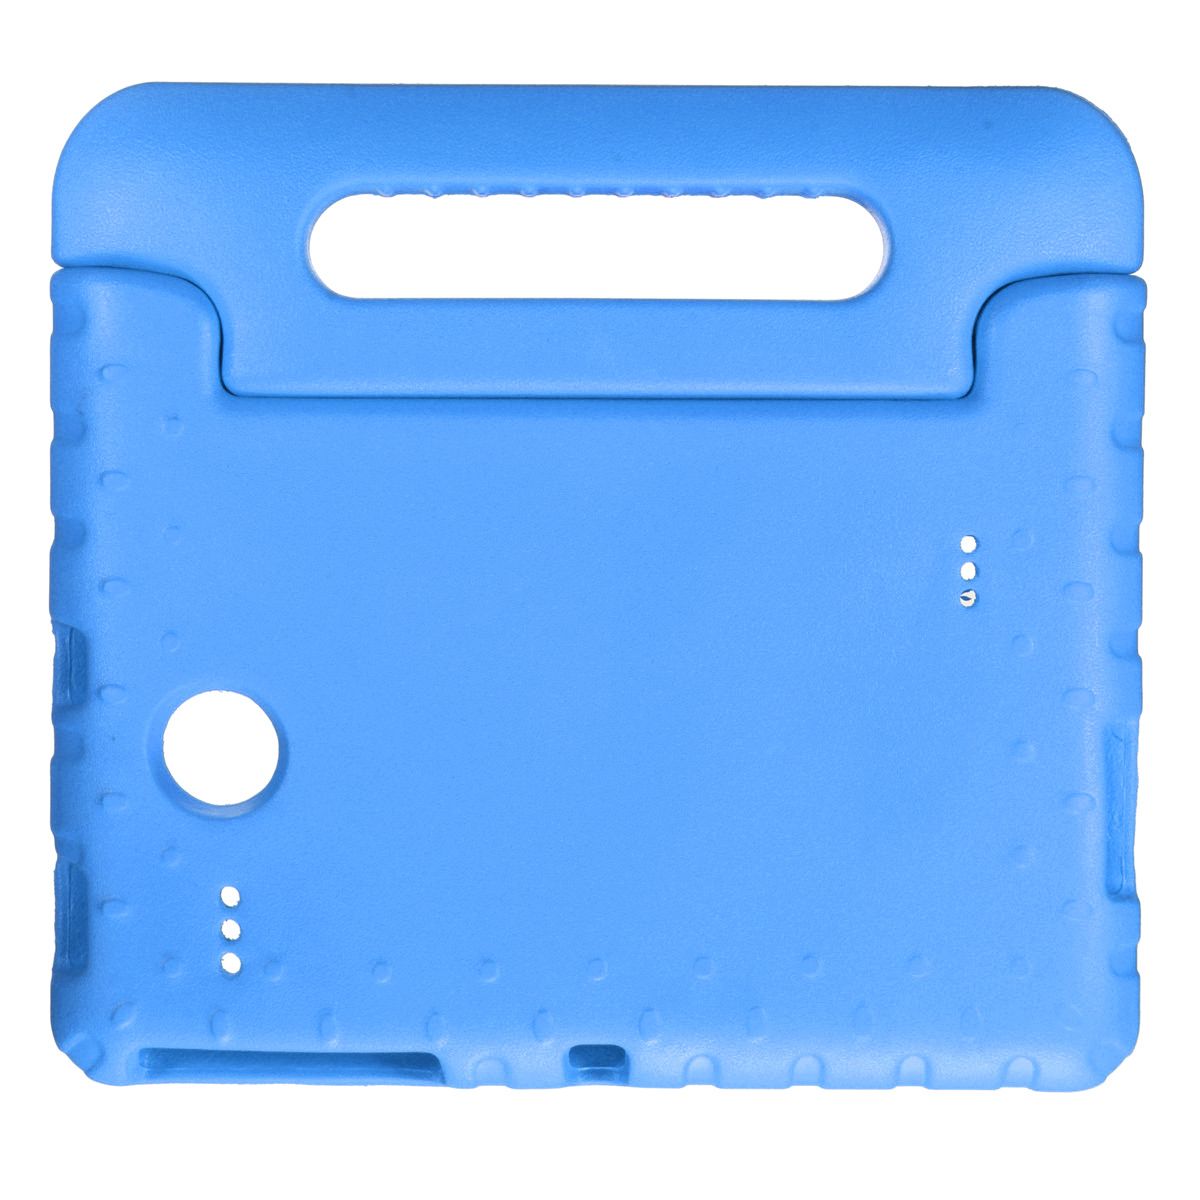 Colorful-EVA-Tablet-Case-Foam-Cover-Stand-Portable-Protective-Case-Back-Stay-for-Tablet-4---80quot-1737894